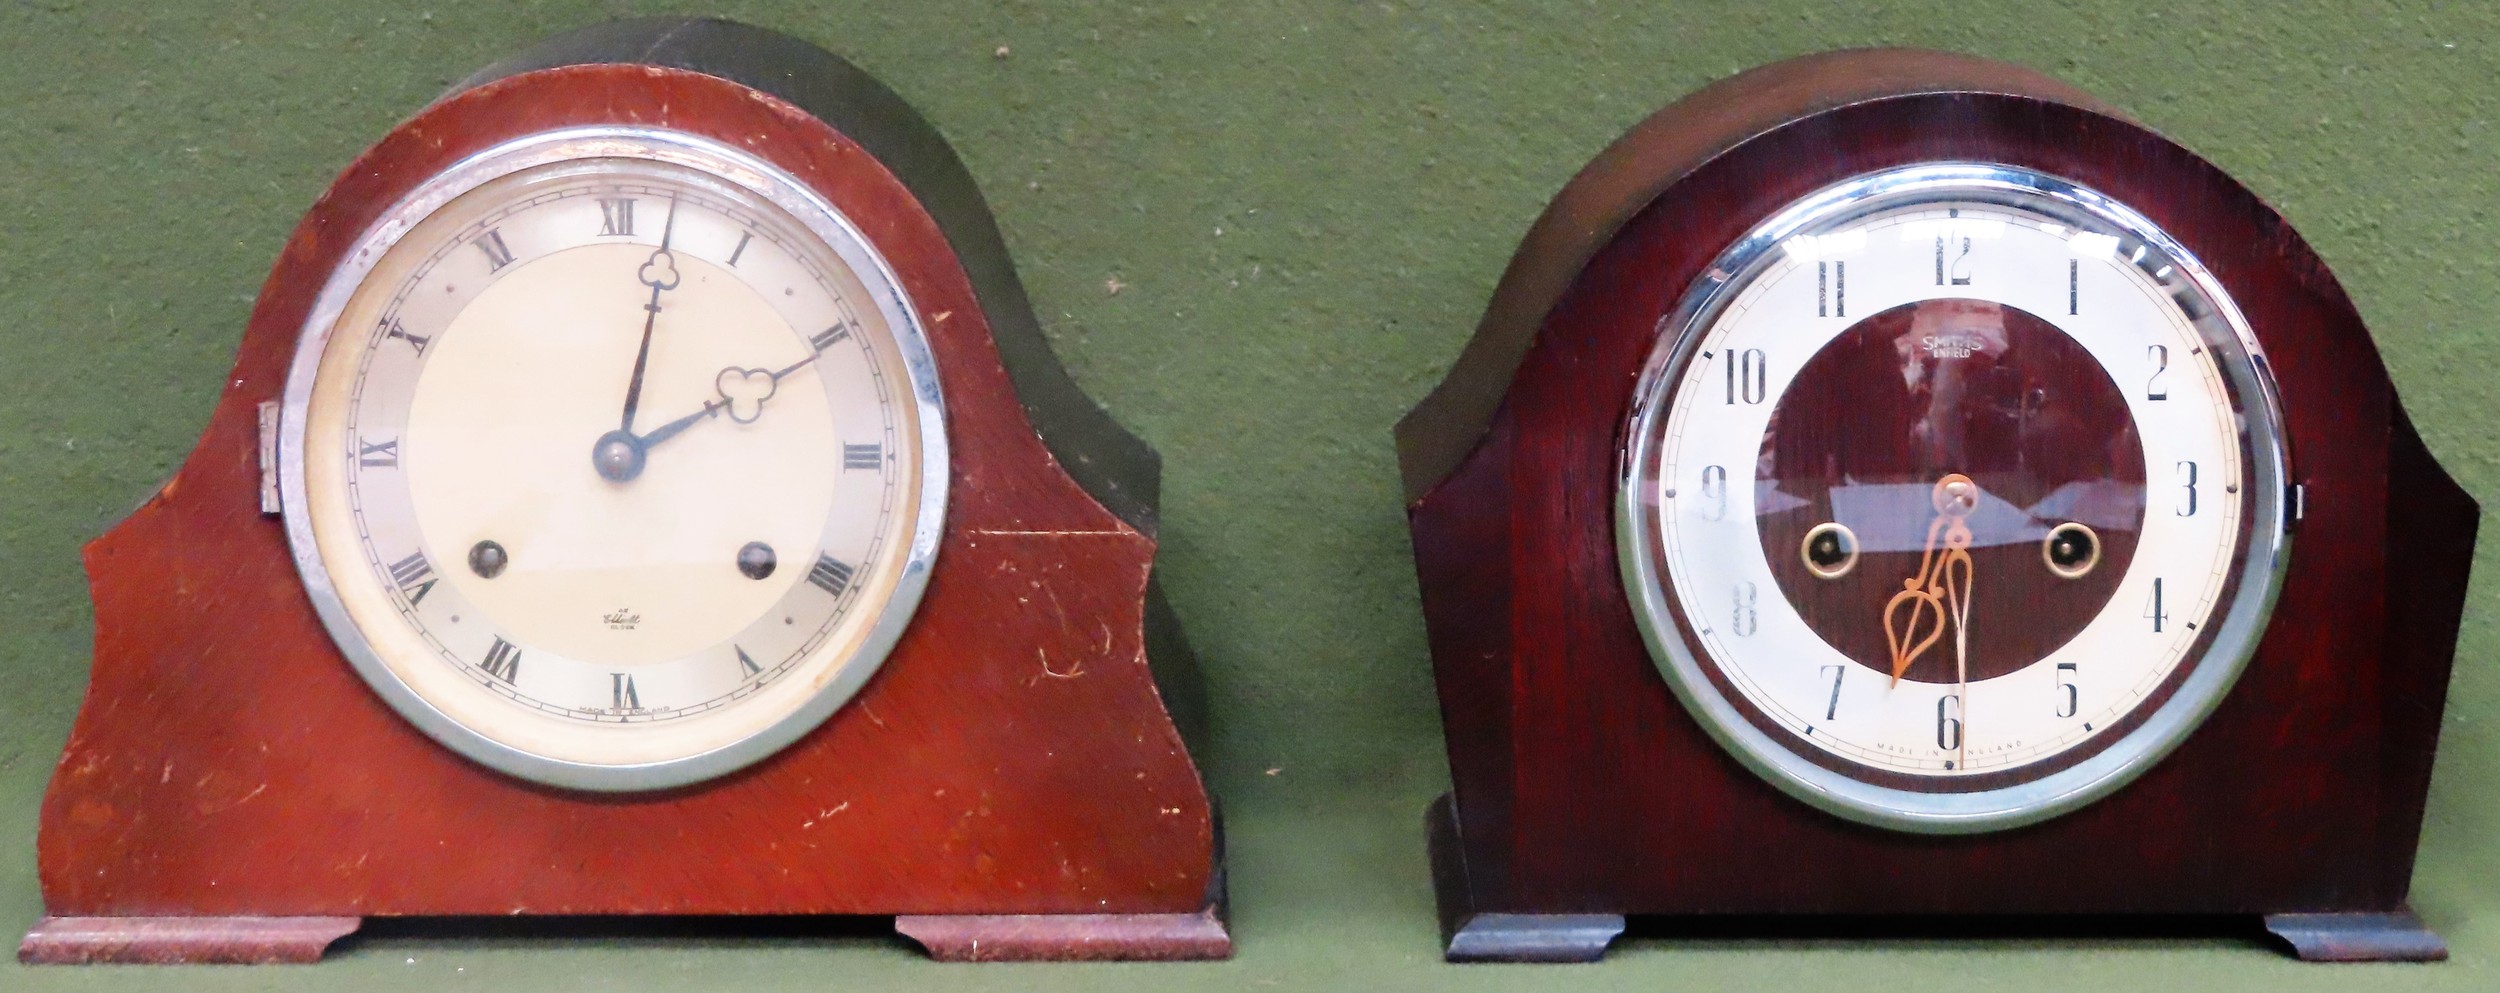 Two Art Deco style wooden cased mantle clocks, by Elliotts & Smiths